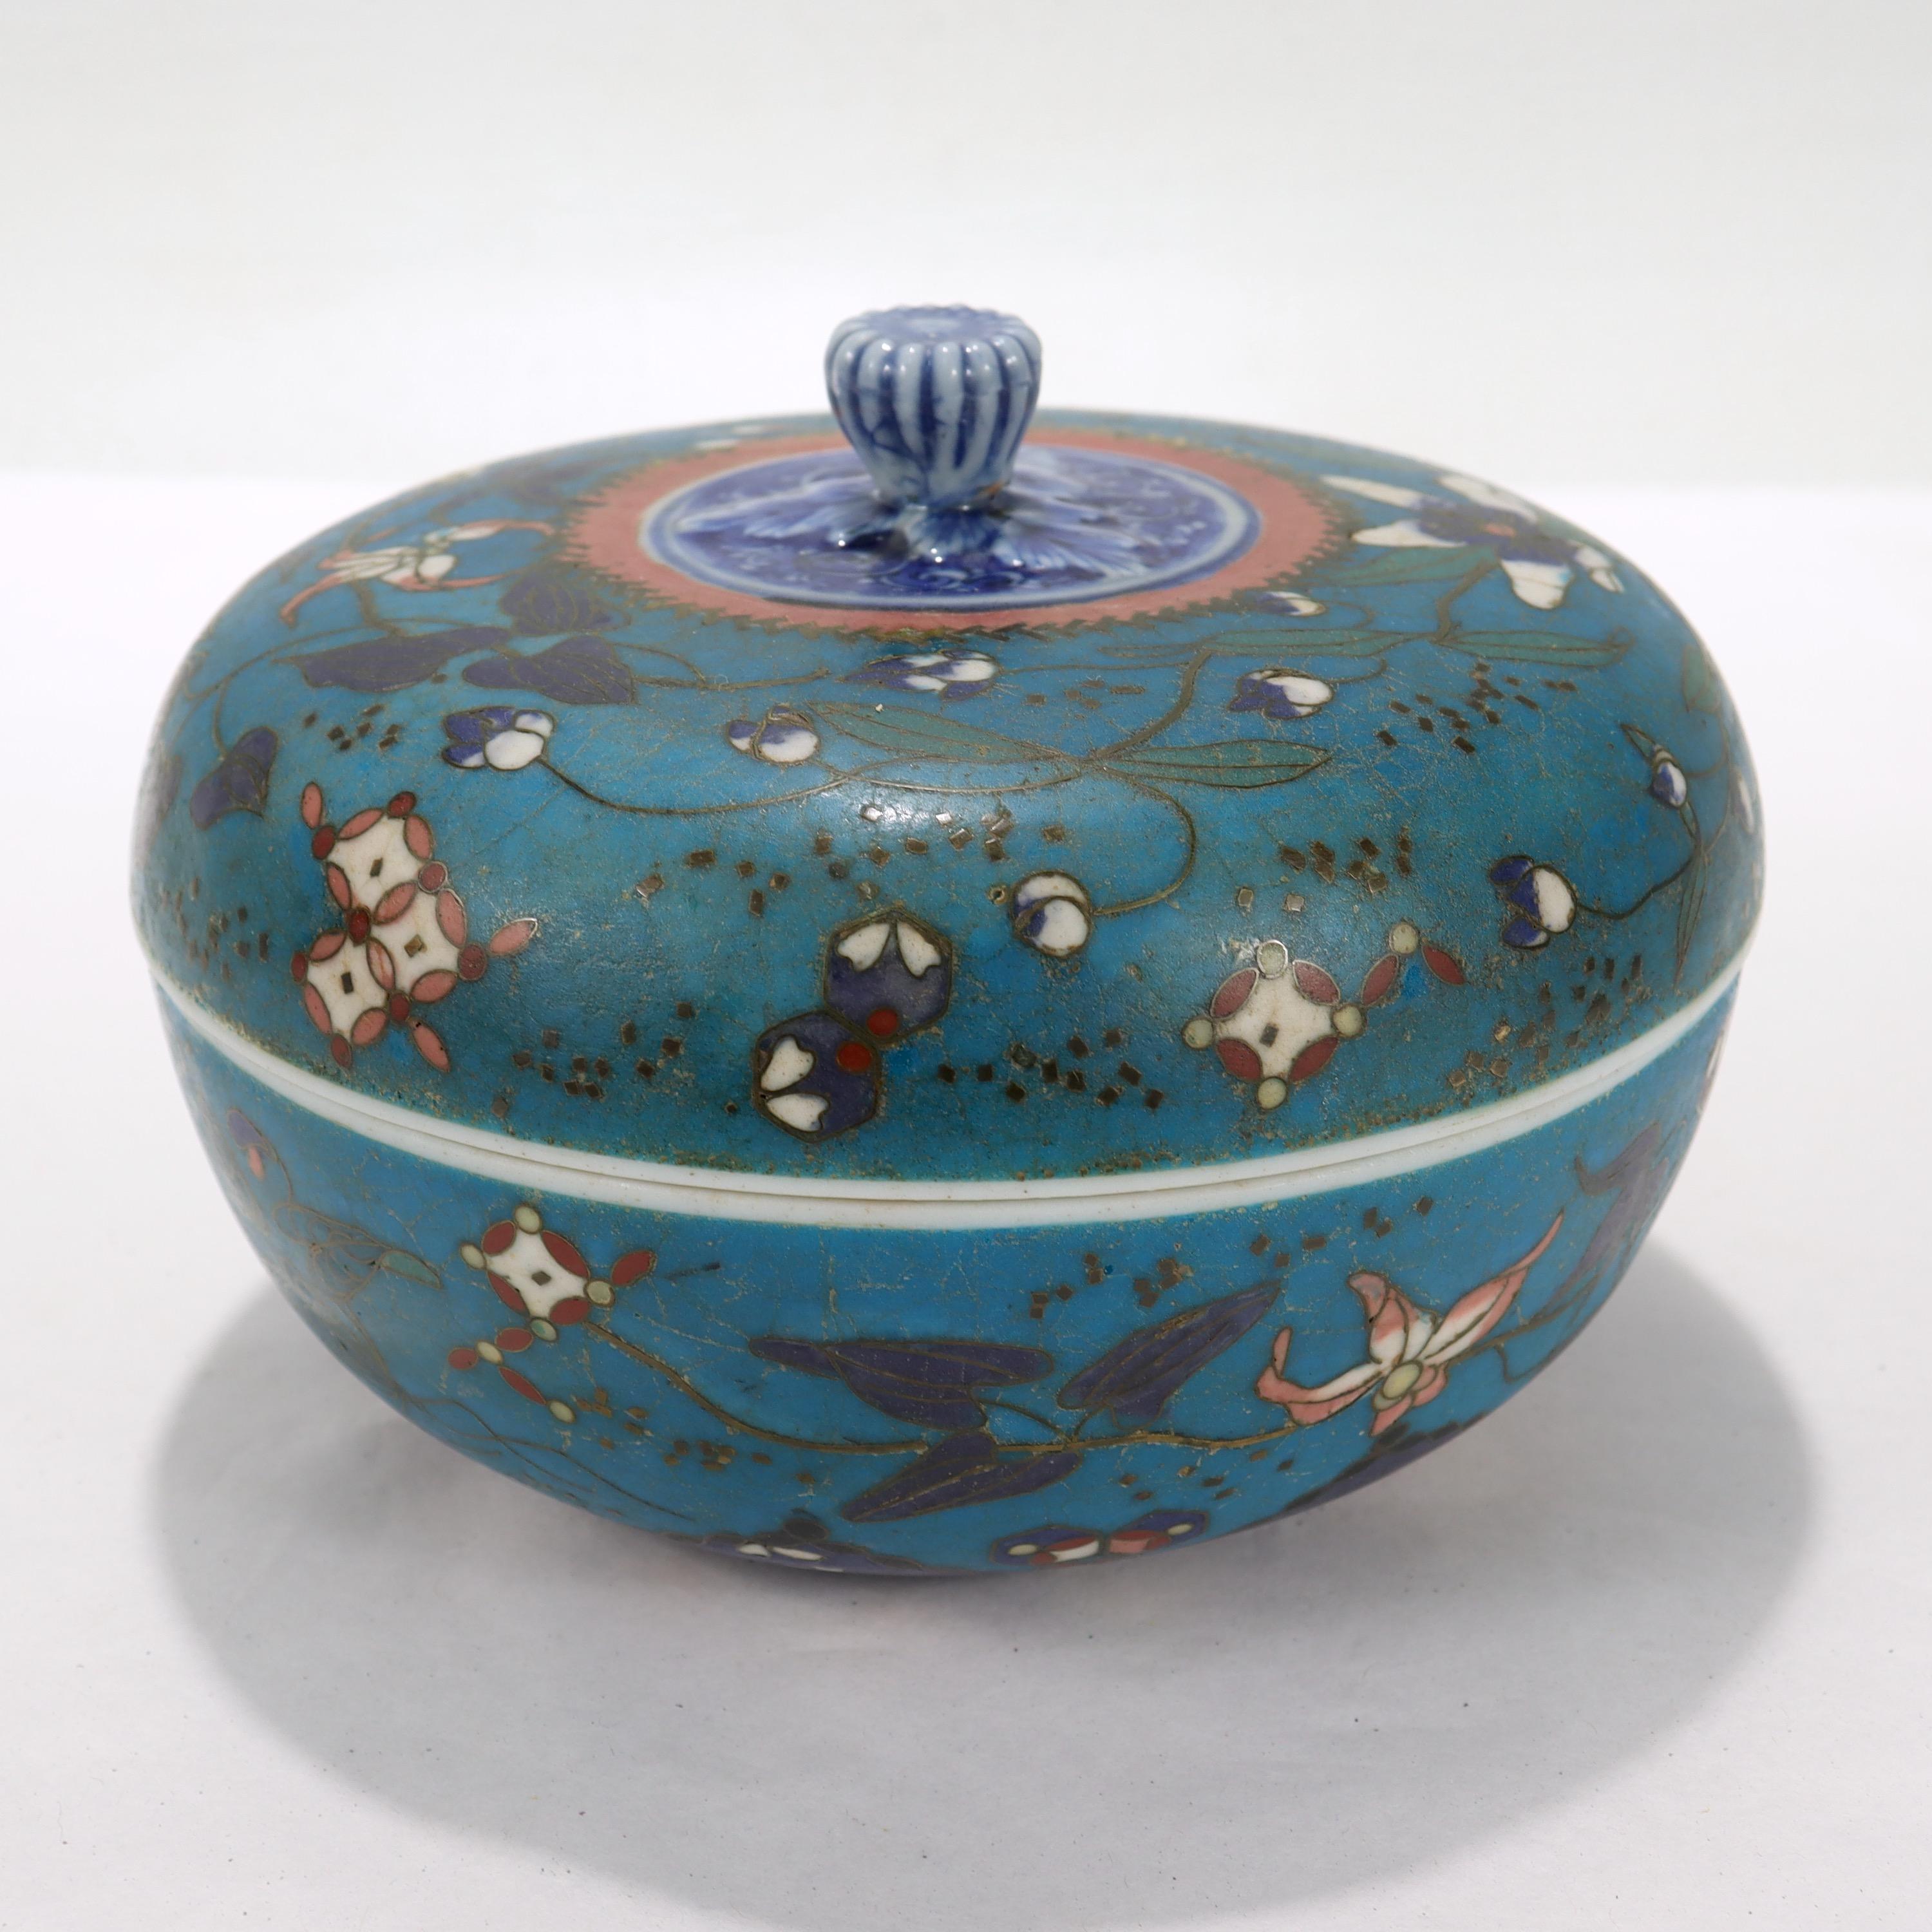 A fine Japanese porcelain box.

Decorated to the exterior with a dark turquoise enamel ground with floral decorations. The figural finial as well as the interiors of the box & lid are classic blue and white porcelain with floral decoration.

Simply